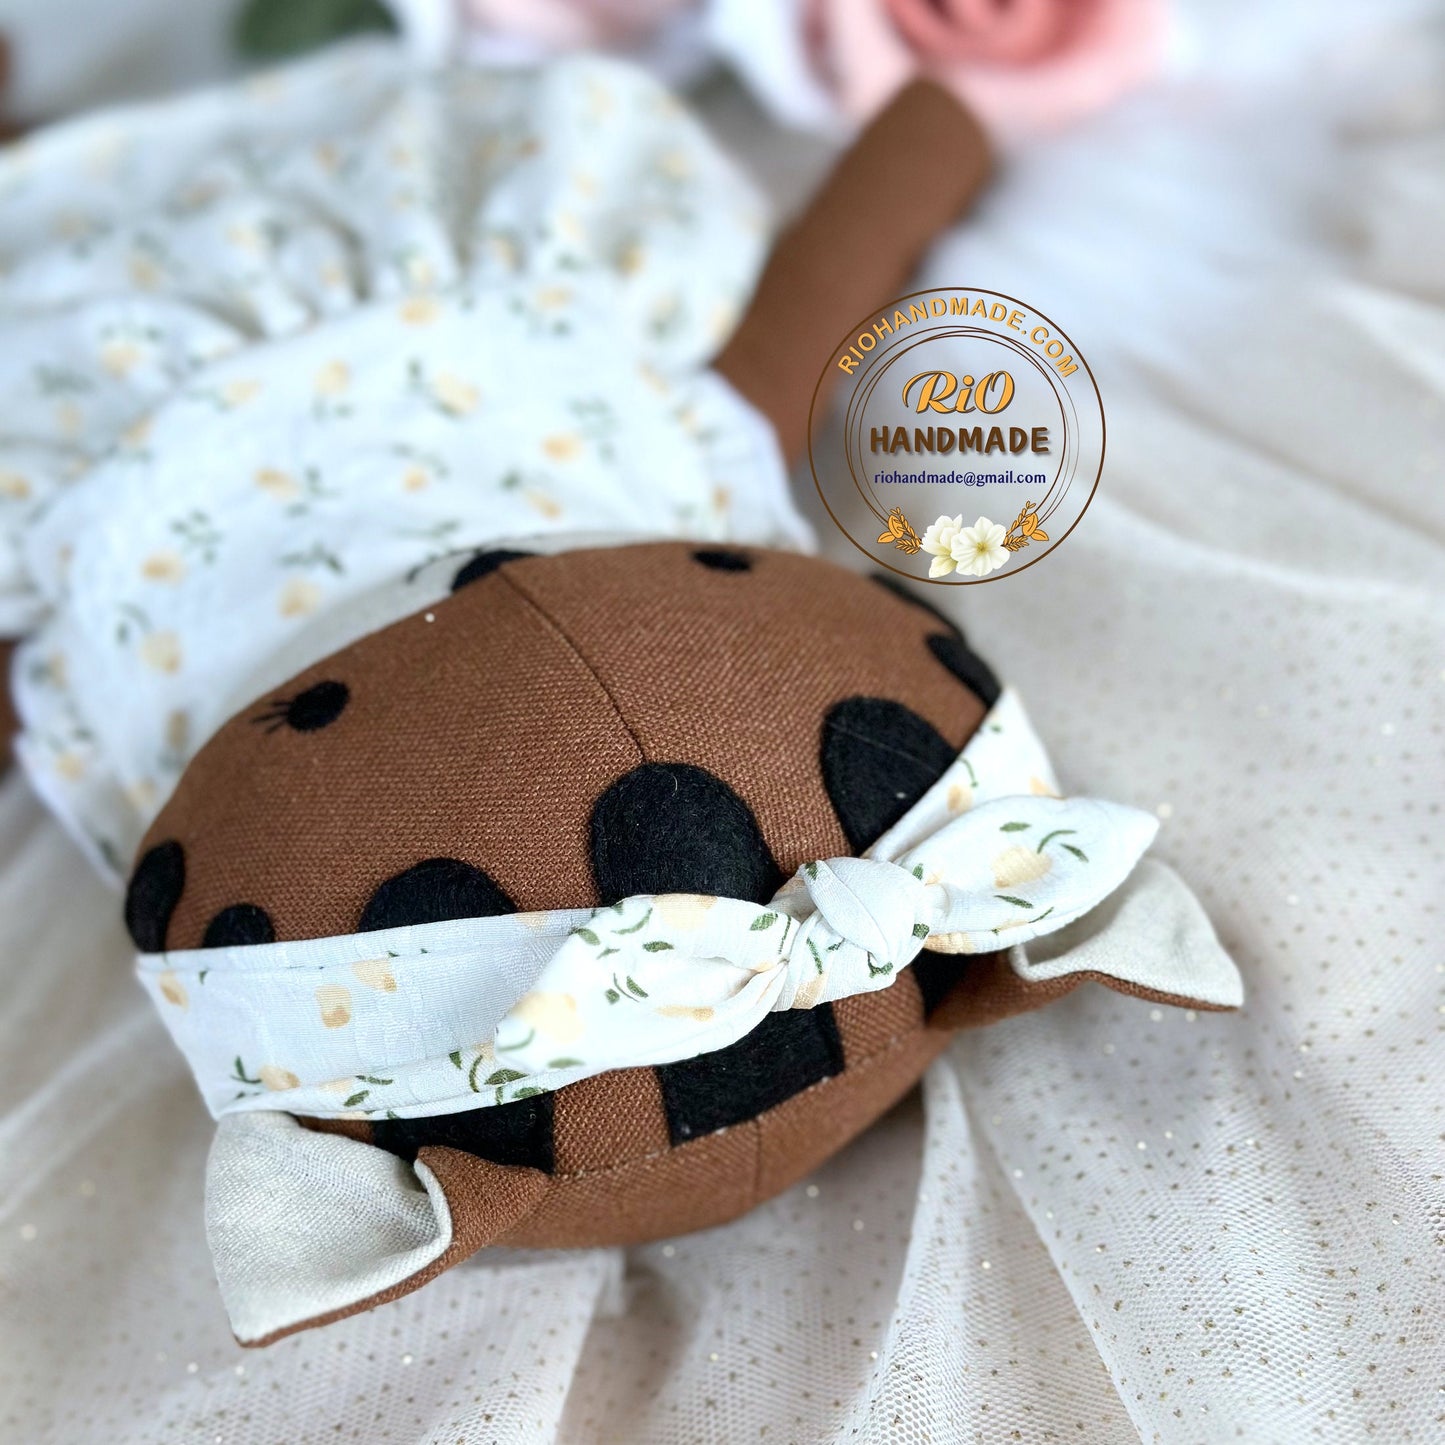 Ready To Ship, Rio Handmade Linen Tiger Toy, Nursery Decor Stuffed, Linen Baby Toy, Soft Stuffed Tiger Toy For Toddler, Kid, Adult Hobby